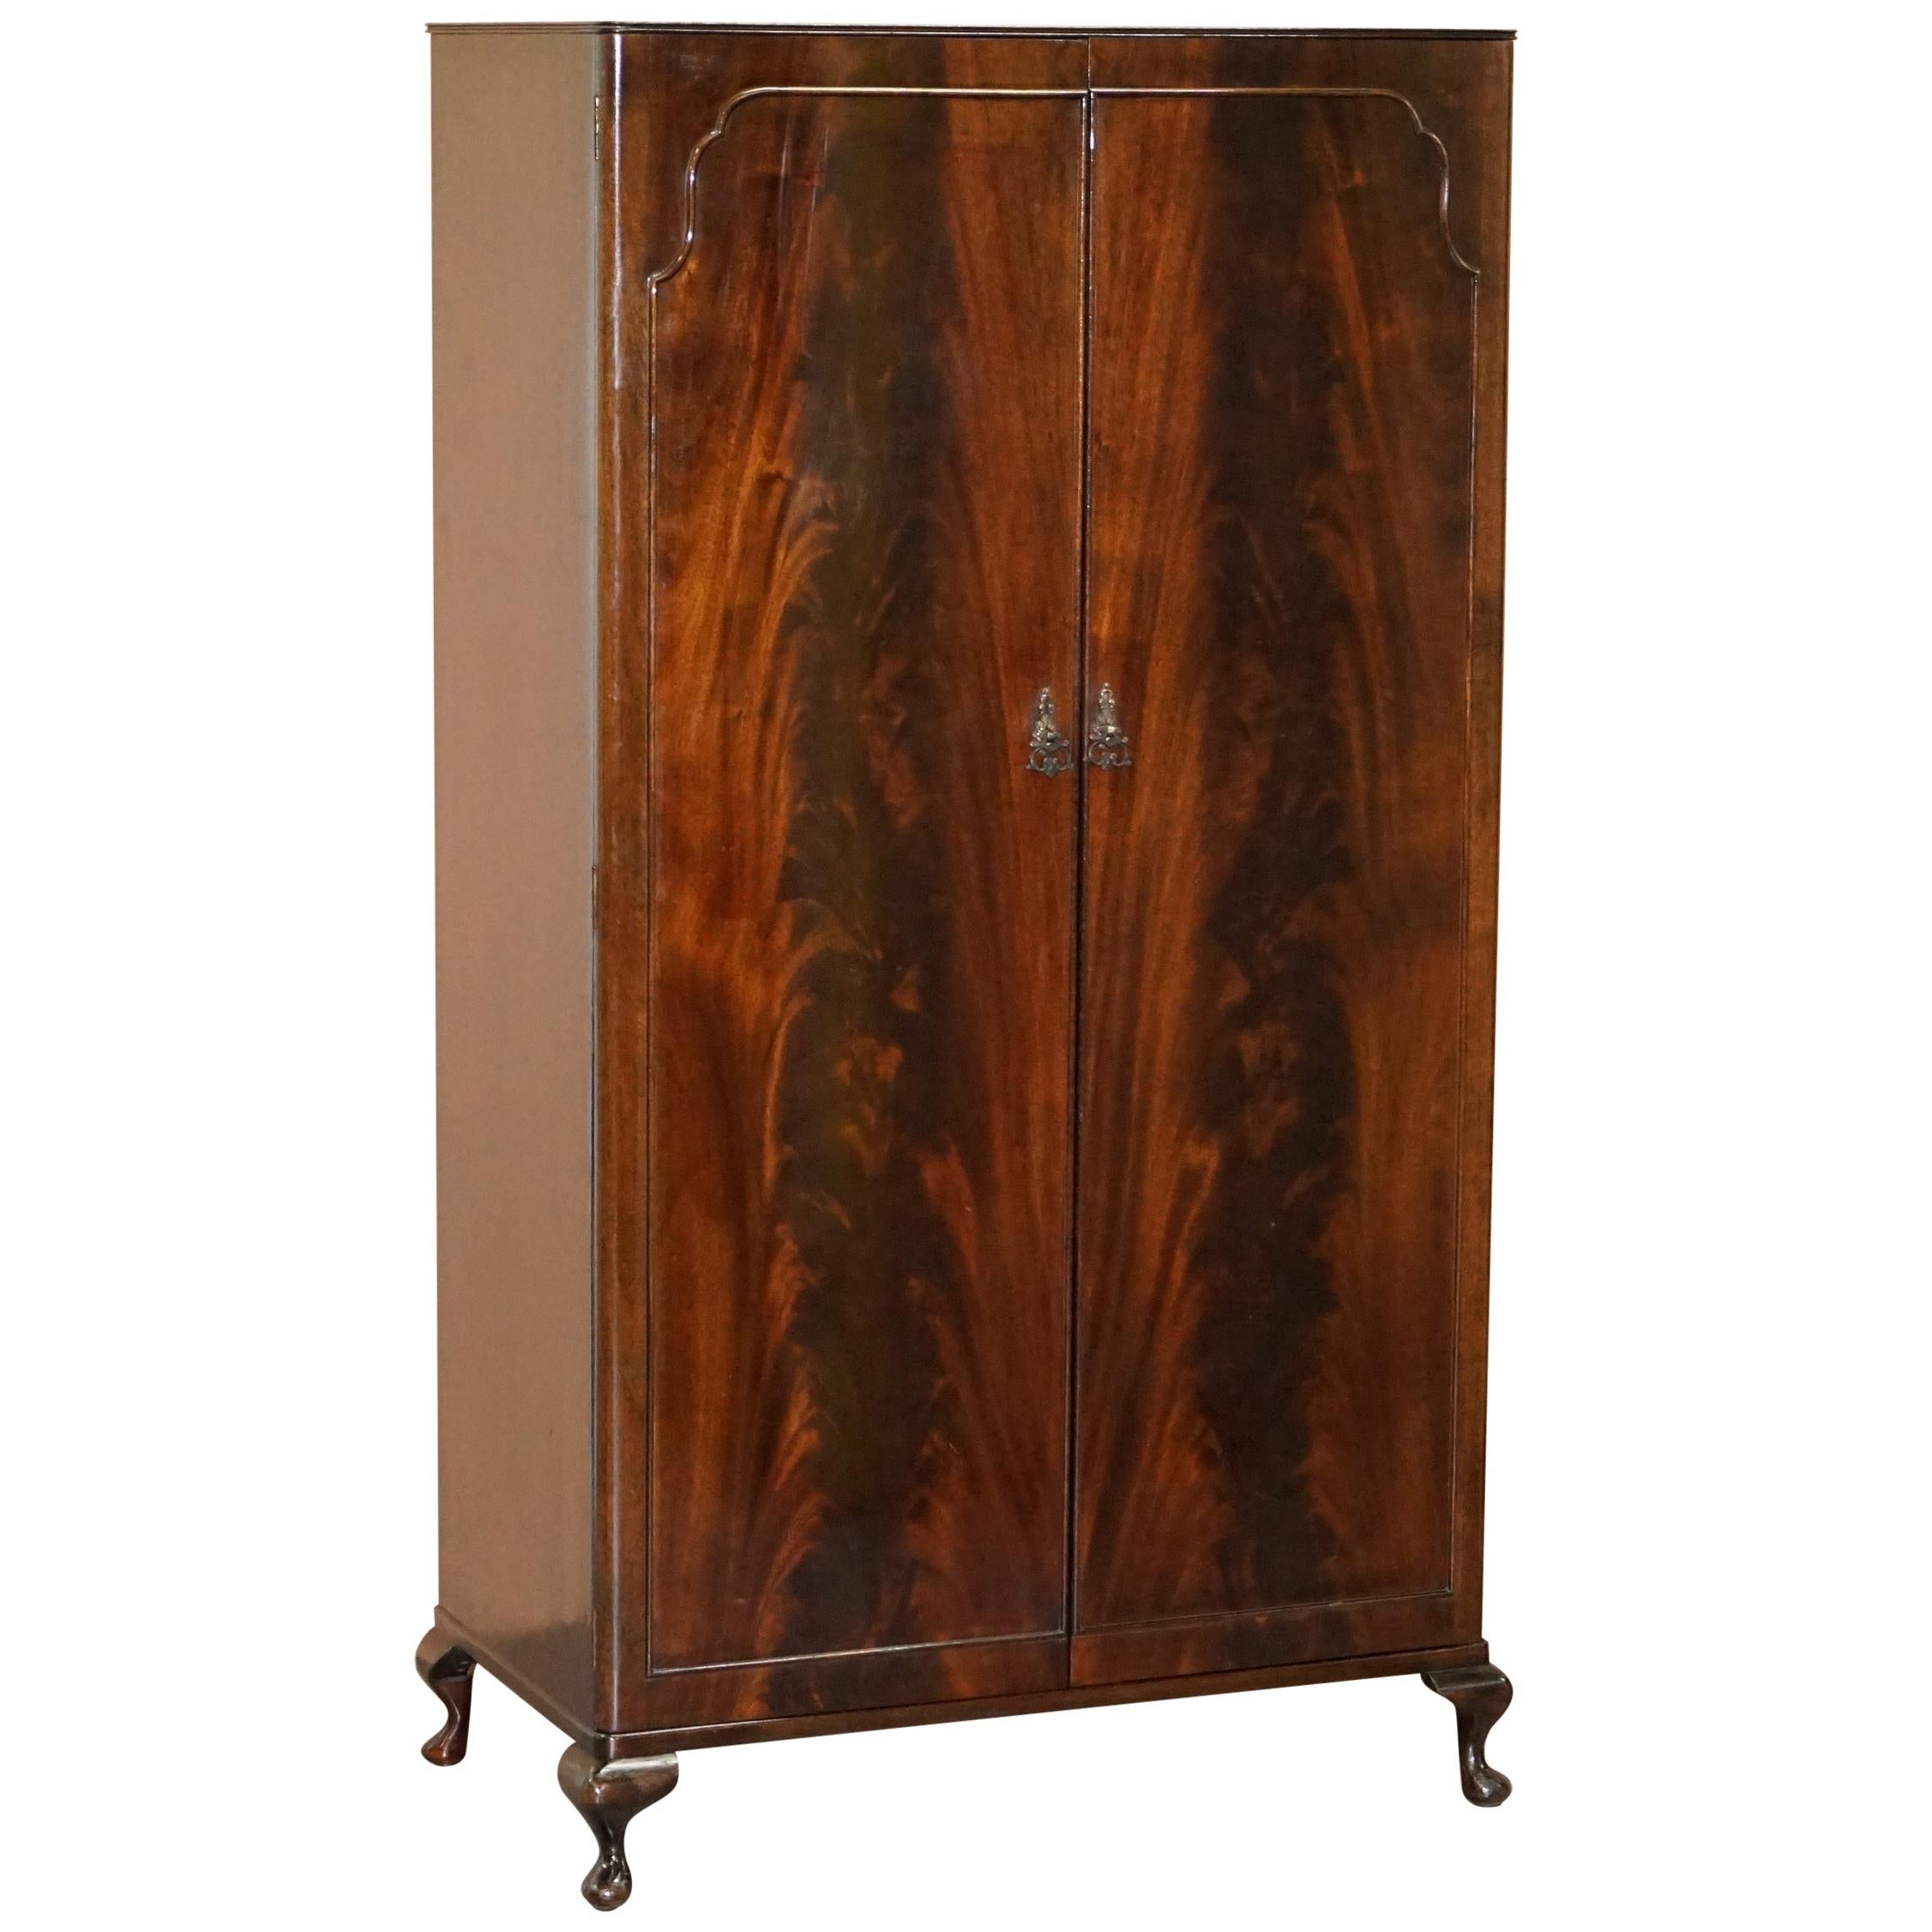 Stunning Beithcraft Scotland Flamed Mahogany Small Wardrobe Part of Large Suite